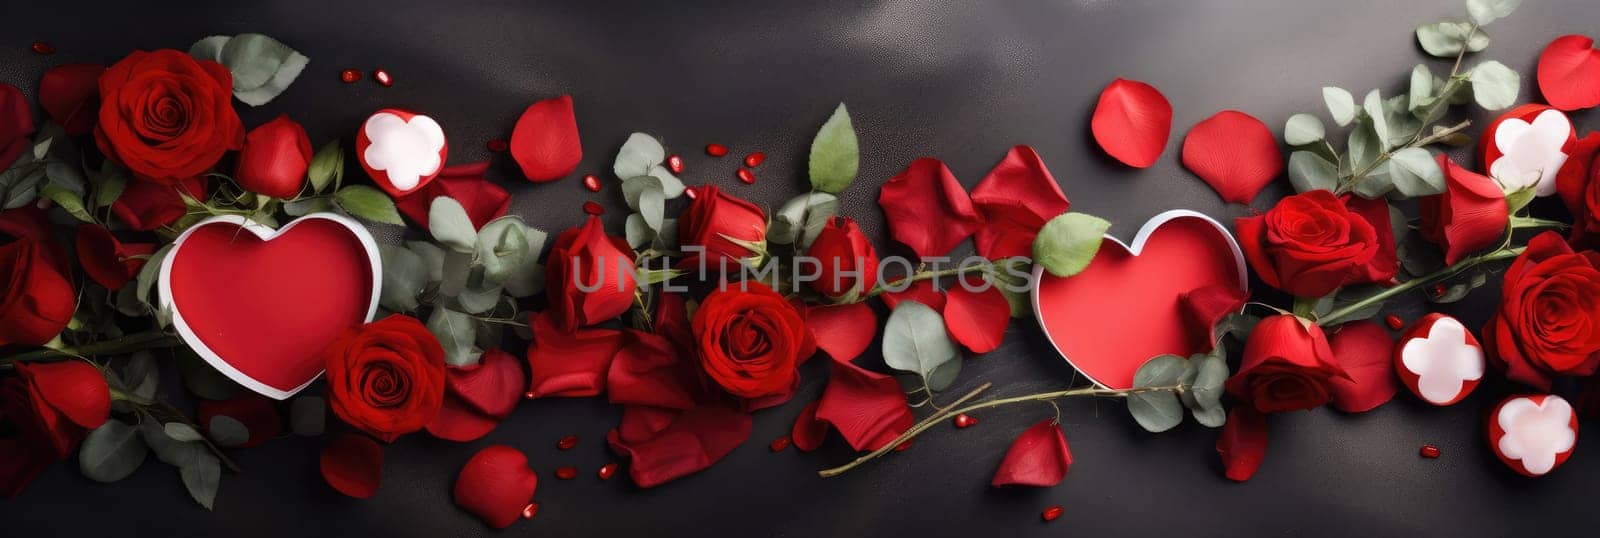 St. Valentines day, wedding banner with abstract illustrated red, pink flying hearts, roses on dark background. Use for cute love sale banners, vouchers or greeting cards. Concept love, copy space